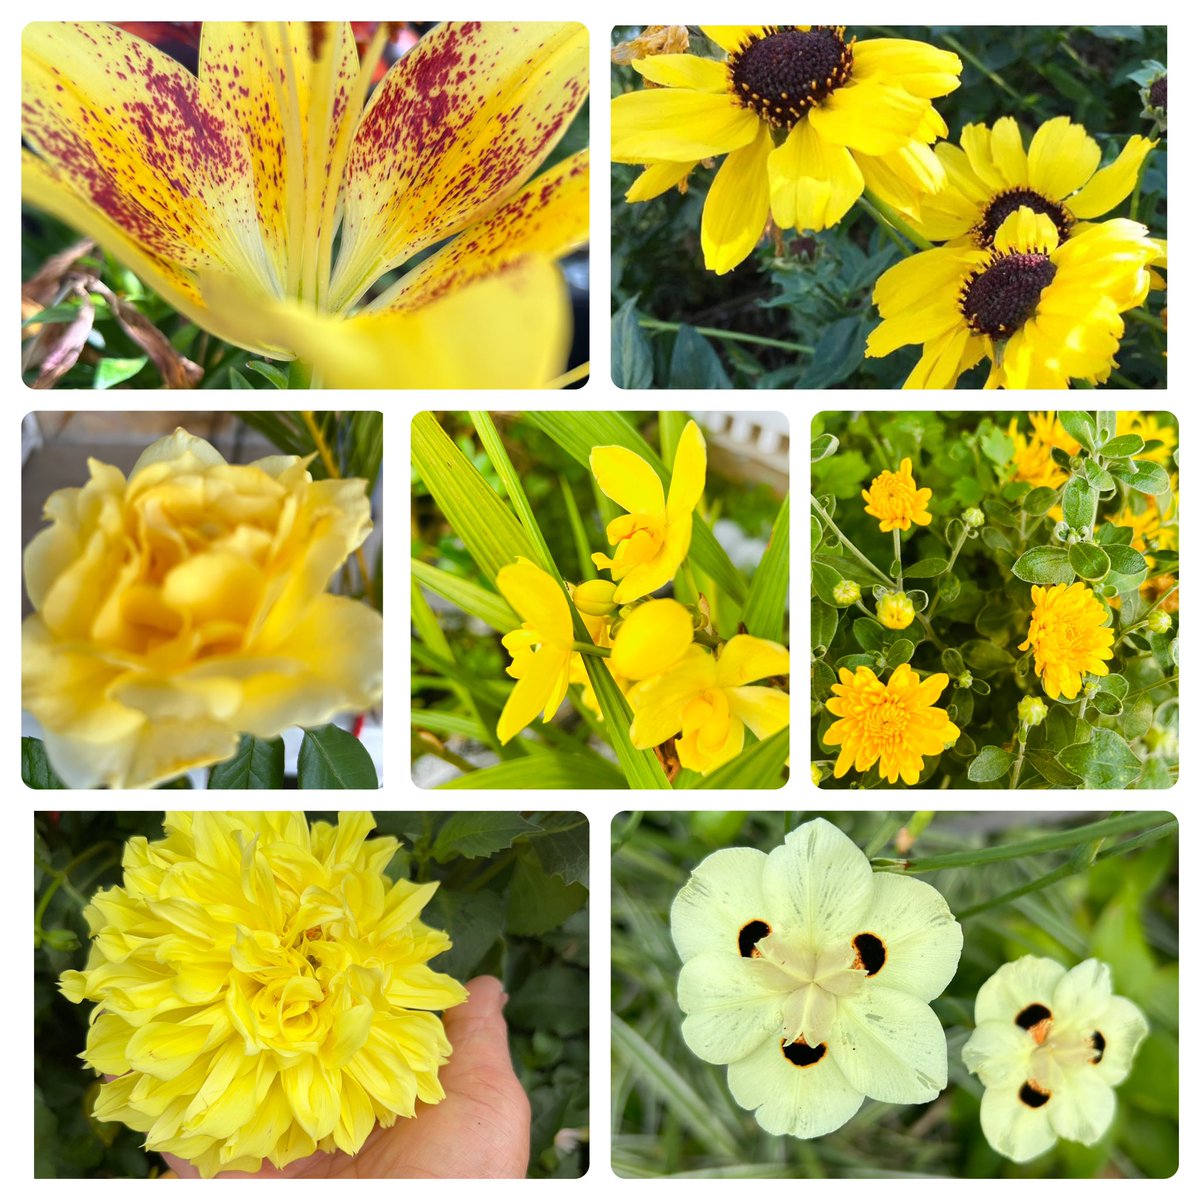 #SundayYellow
#SevenOnSunday
Gratitude places YOU in the energy field of plentitude.
Glow with gratitude and see how AWE and JOY will make their HOME in you
. 
Have a happy and blessed Easter Sunday

Mums, cone flowers, ground orchids, lily, 
dahlia, rose and doggie irises. 💛🌼